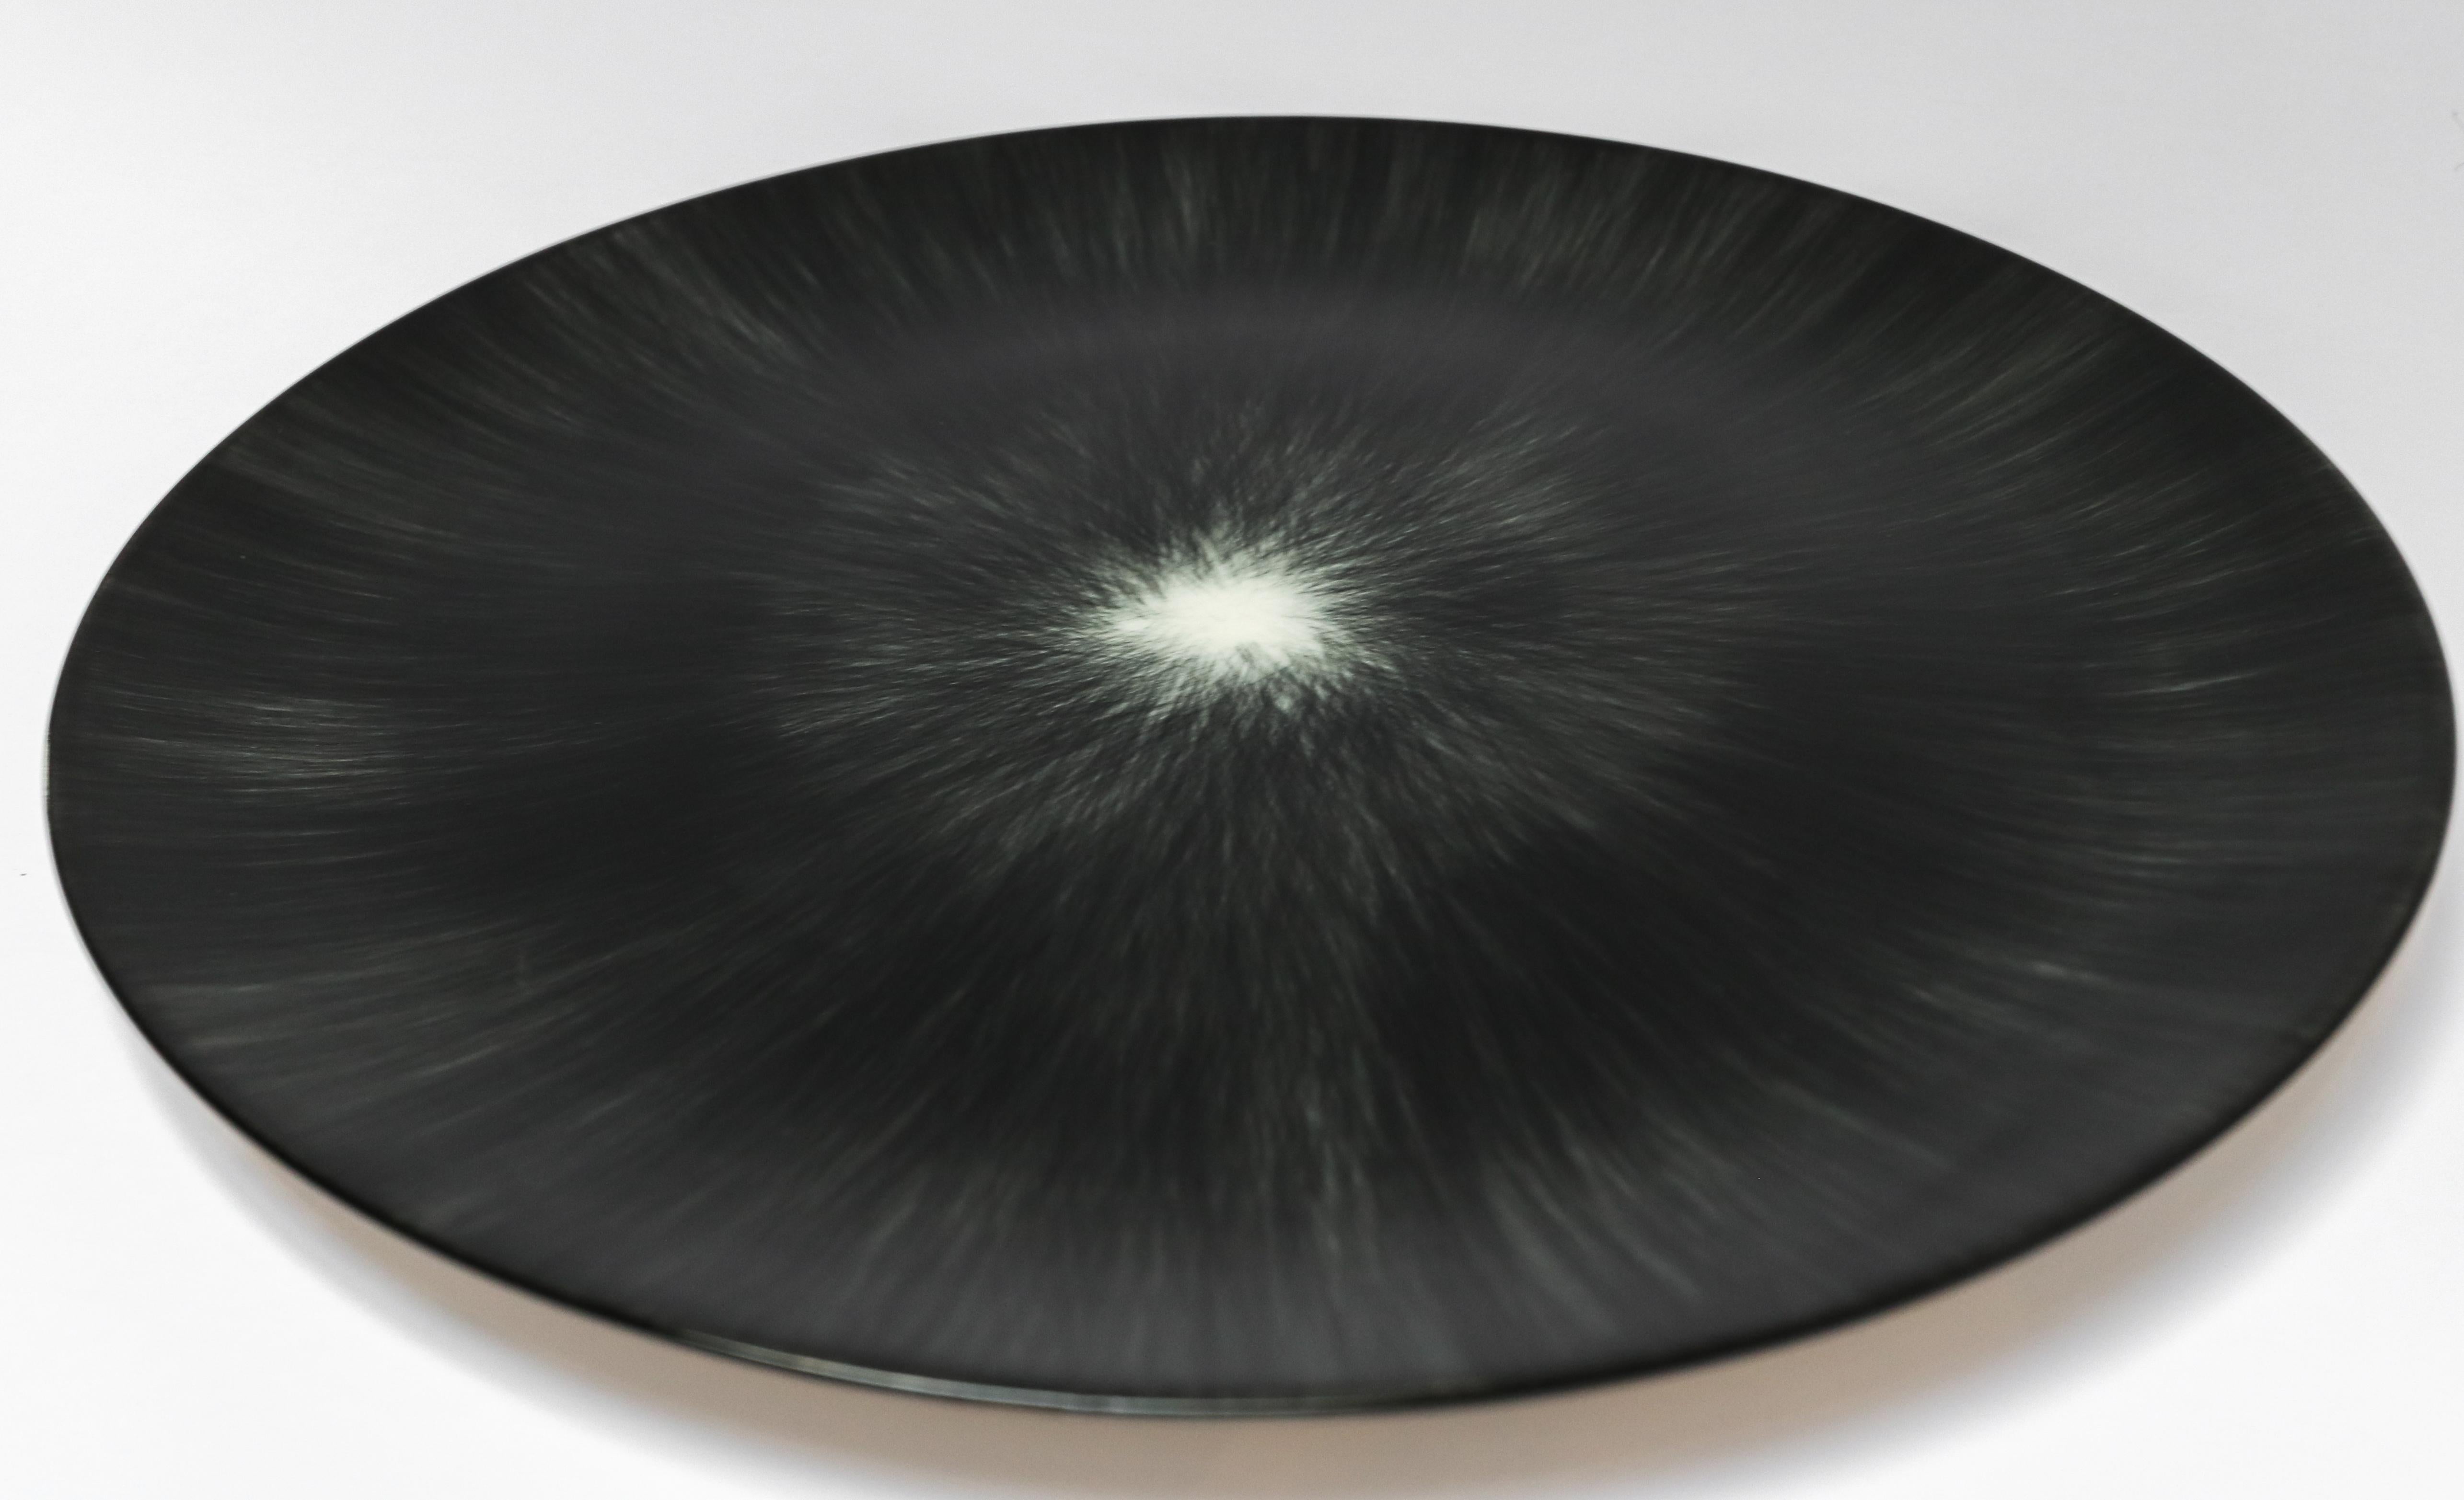 Ann Demeulemeester for Serax Dé dinner plate in black / off white. Hand painted with a starburst pattern. 24cm diameter x 1.1 cm high. Must be purchased in quantities of two.